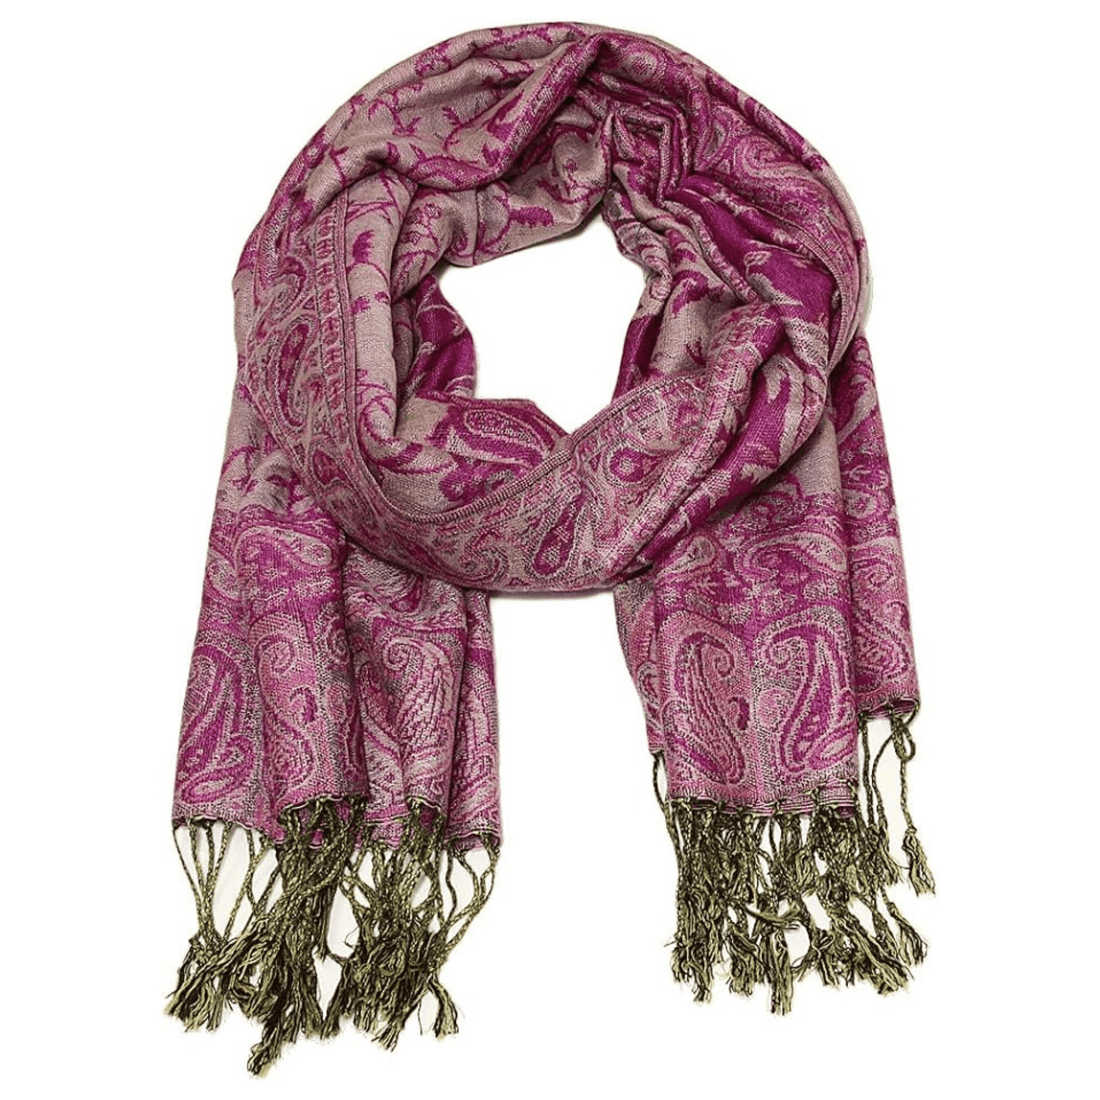 Rave Essentials Co. 3-5 Day Expedited Shipping [USA ONLY] / Style 1 - Violet RE® Deluxe Paisley Pashmina